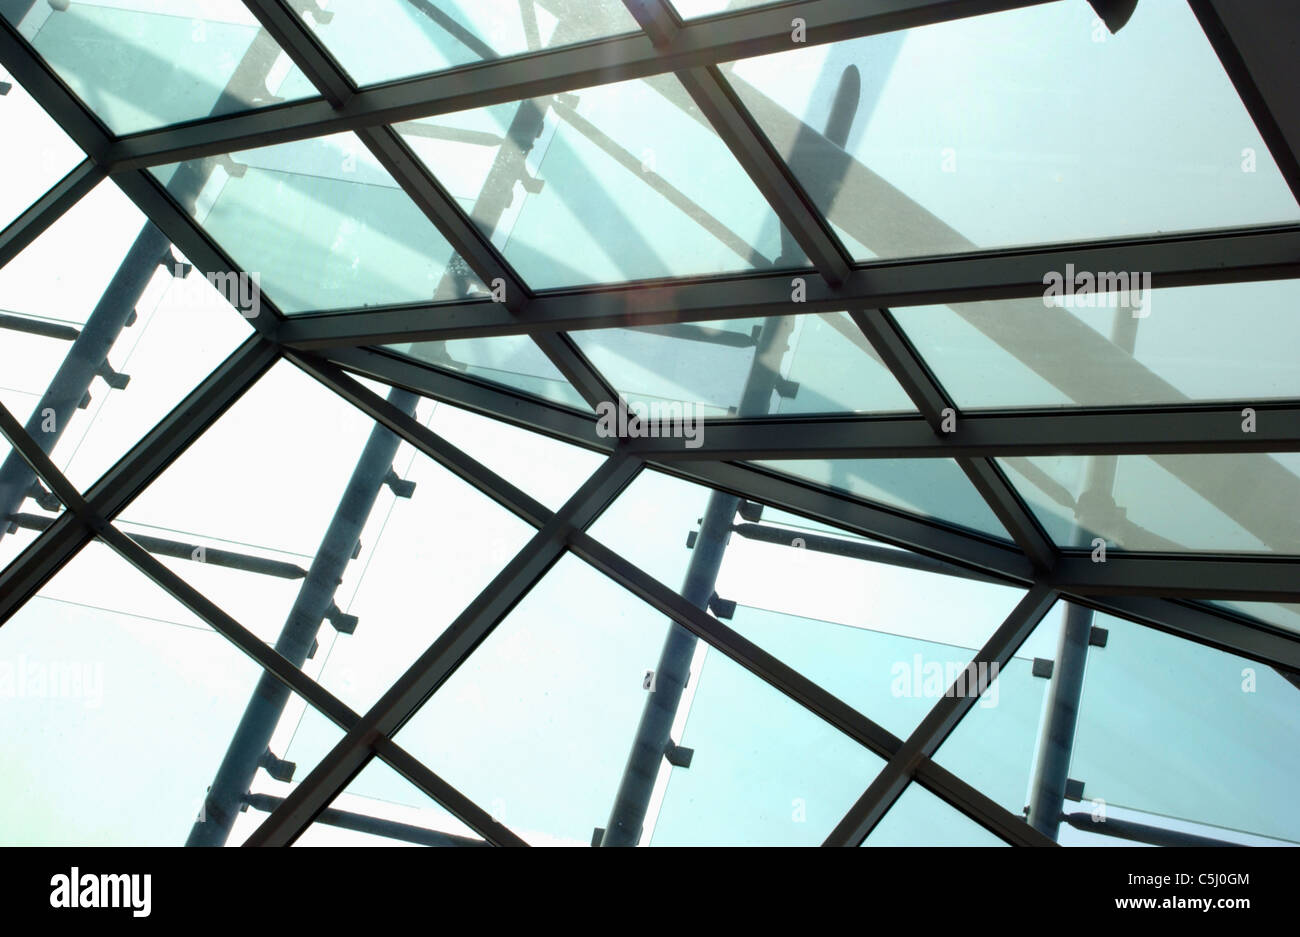 Criss-cross steel structure with glass panes in atrium Stock Photo - Alamy